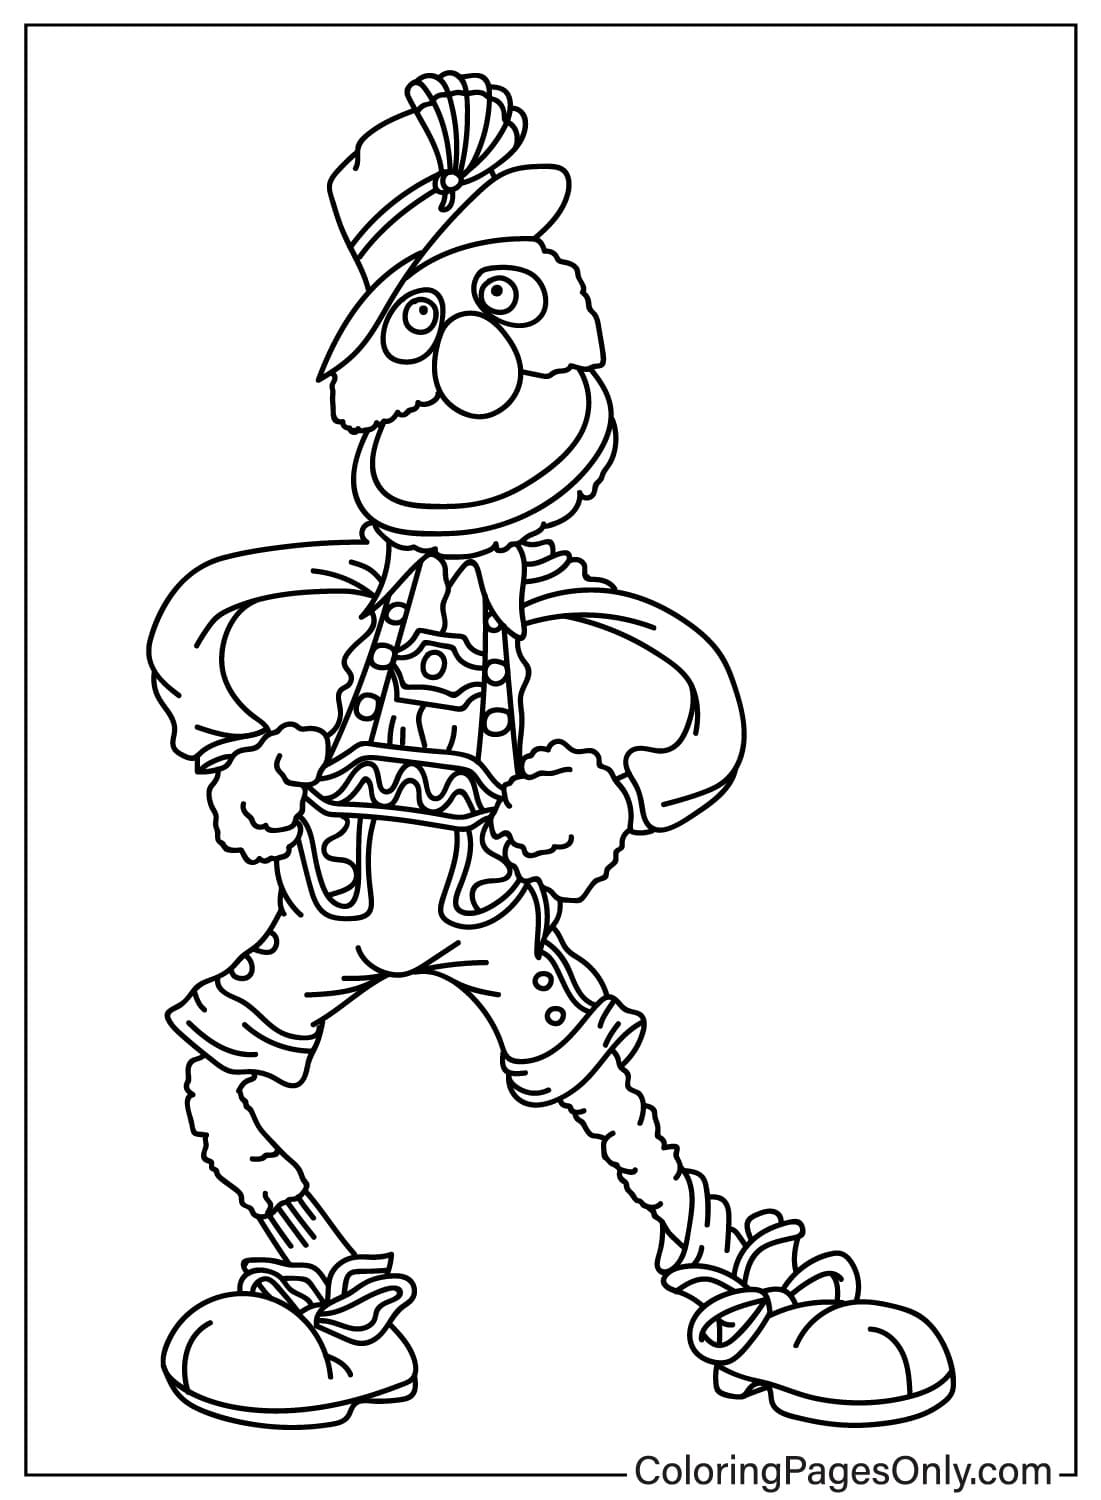 Grover Coloring Page Free